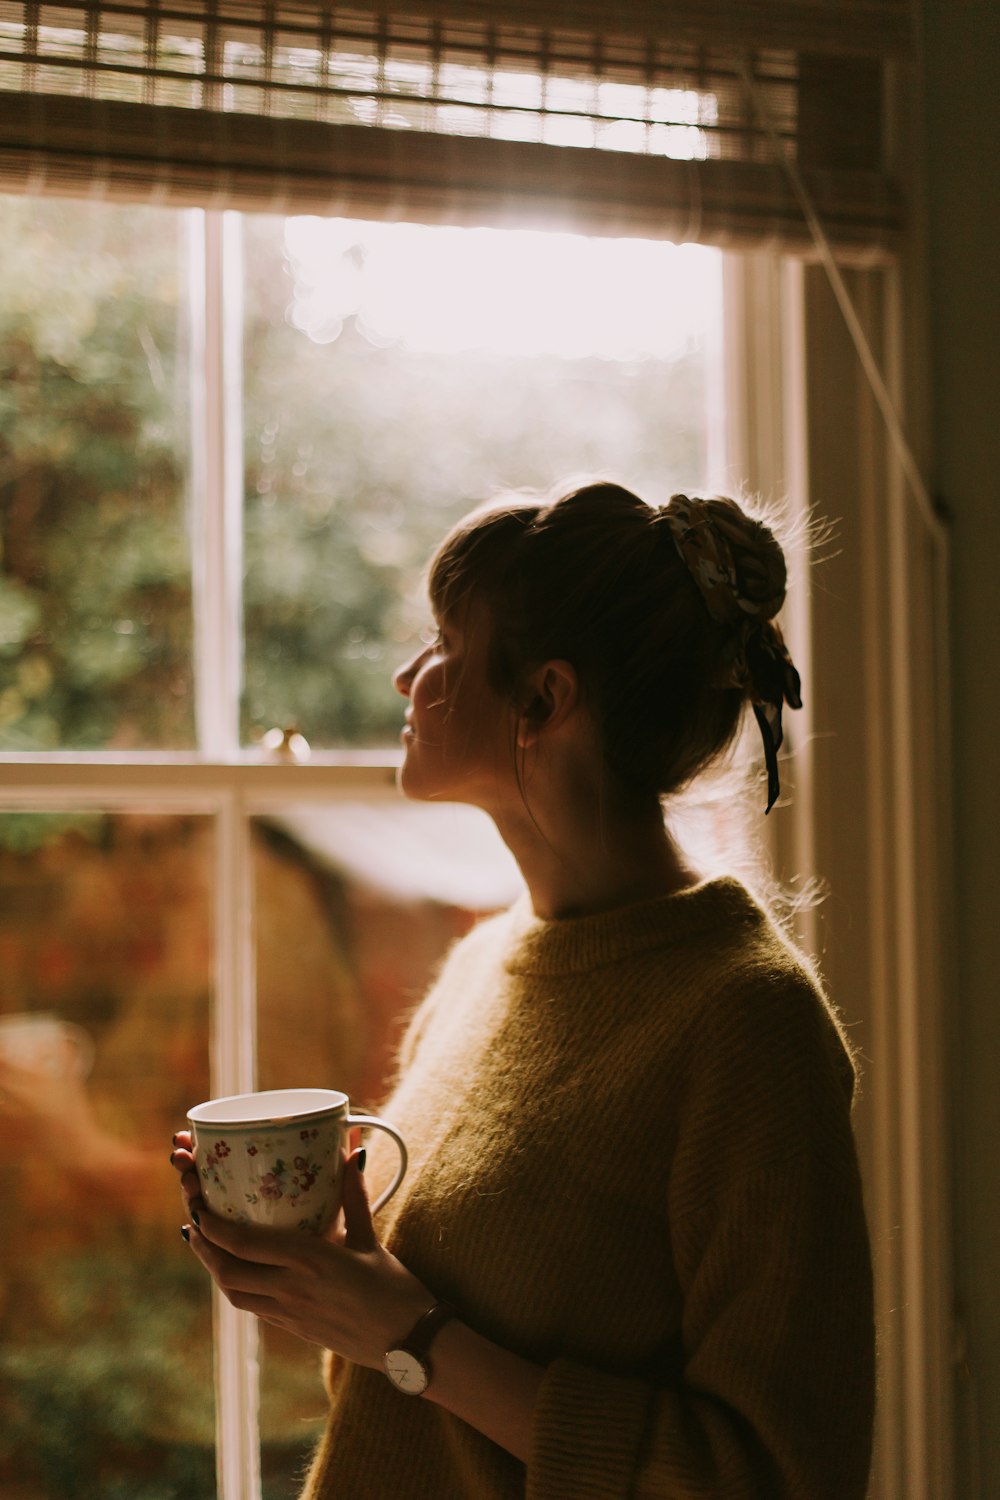 woman holding teacup while standing near window inside room during daytime